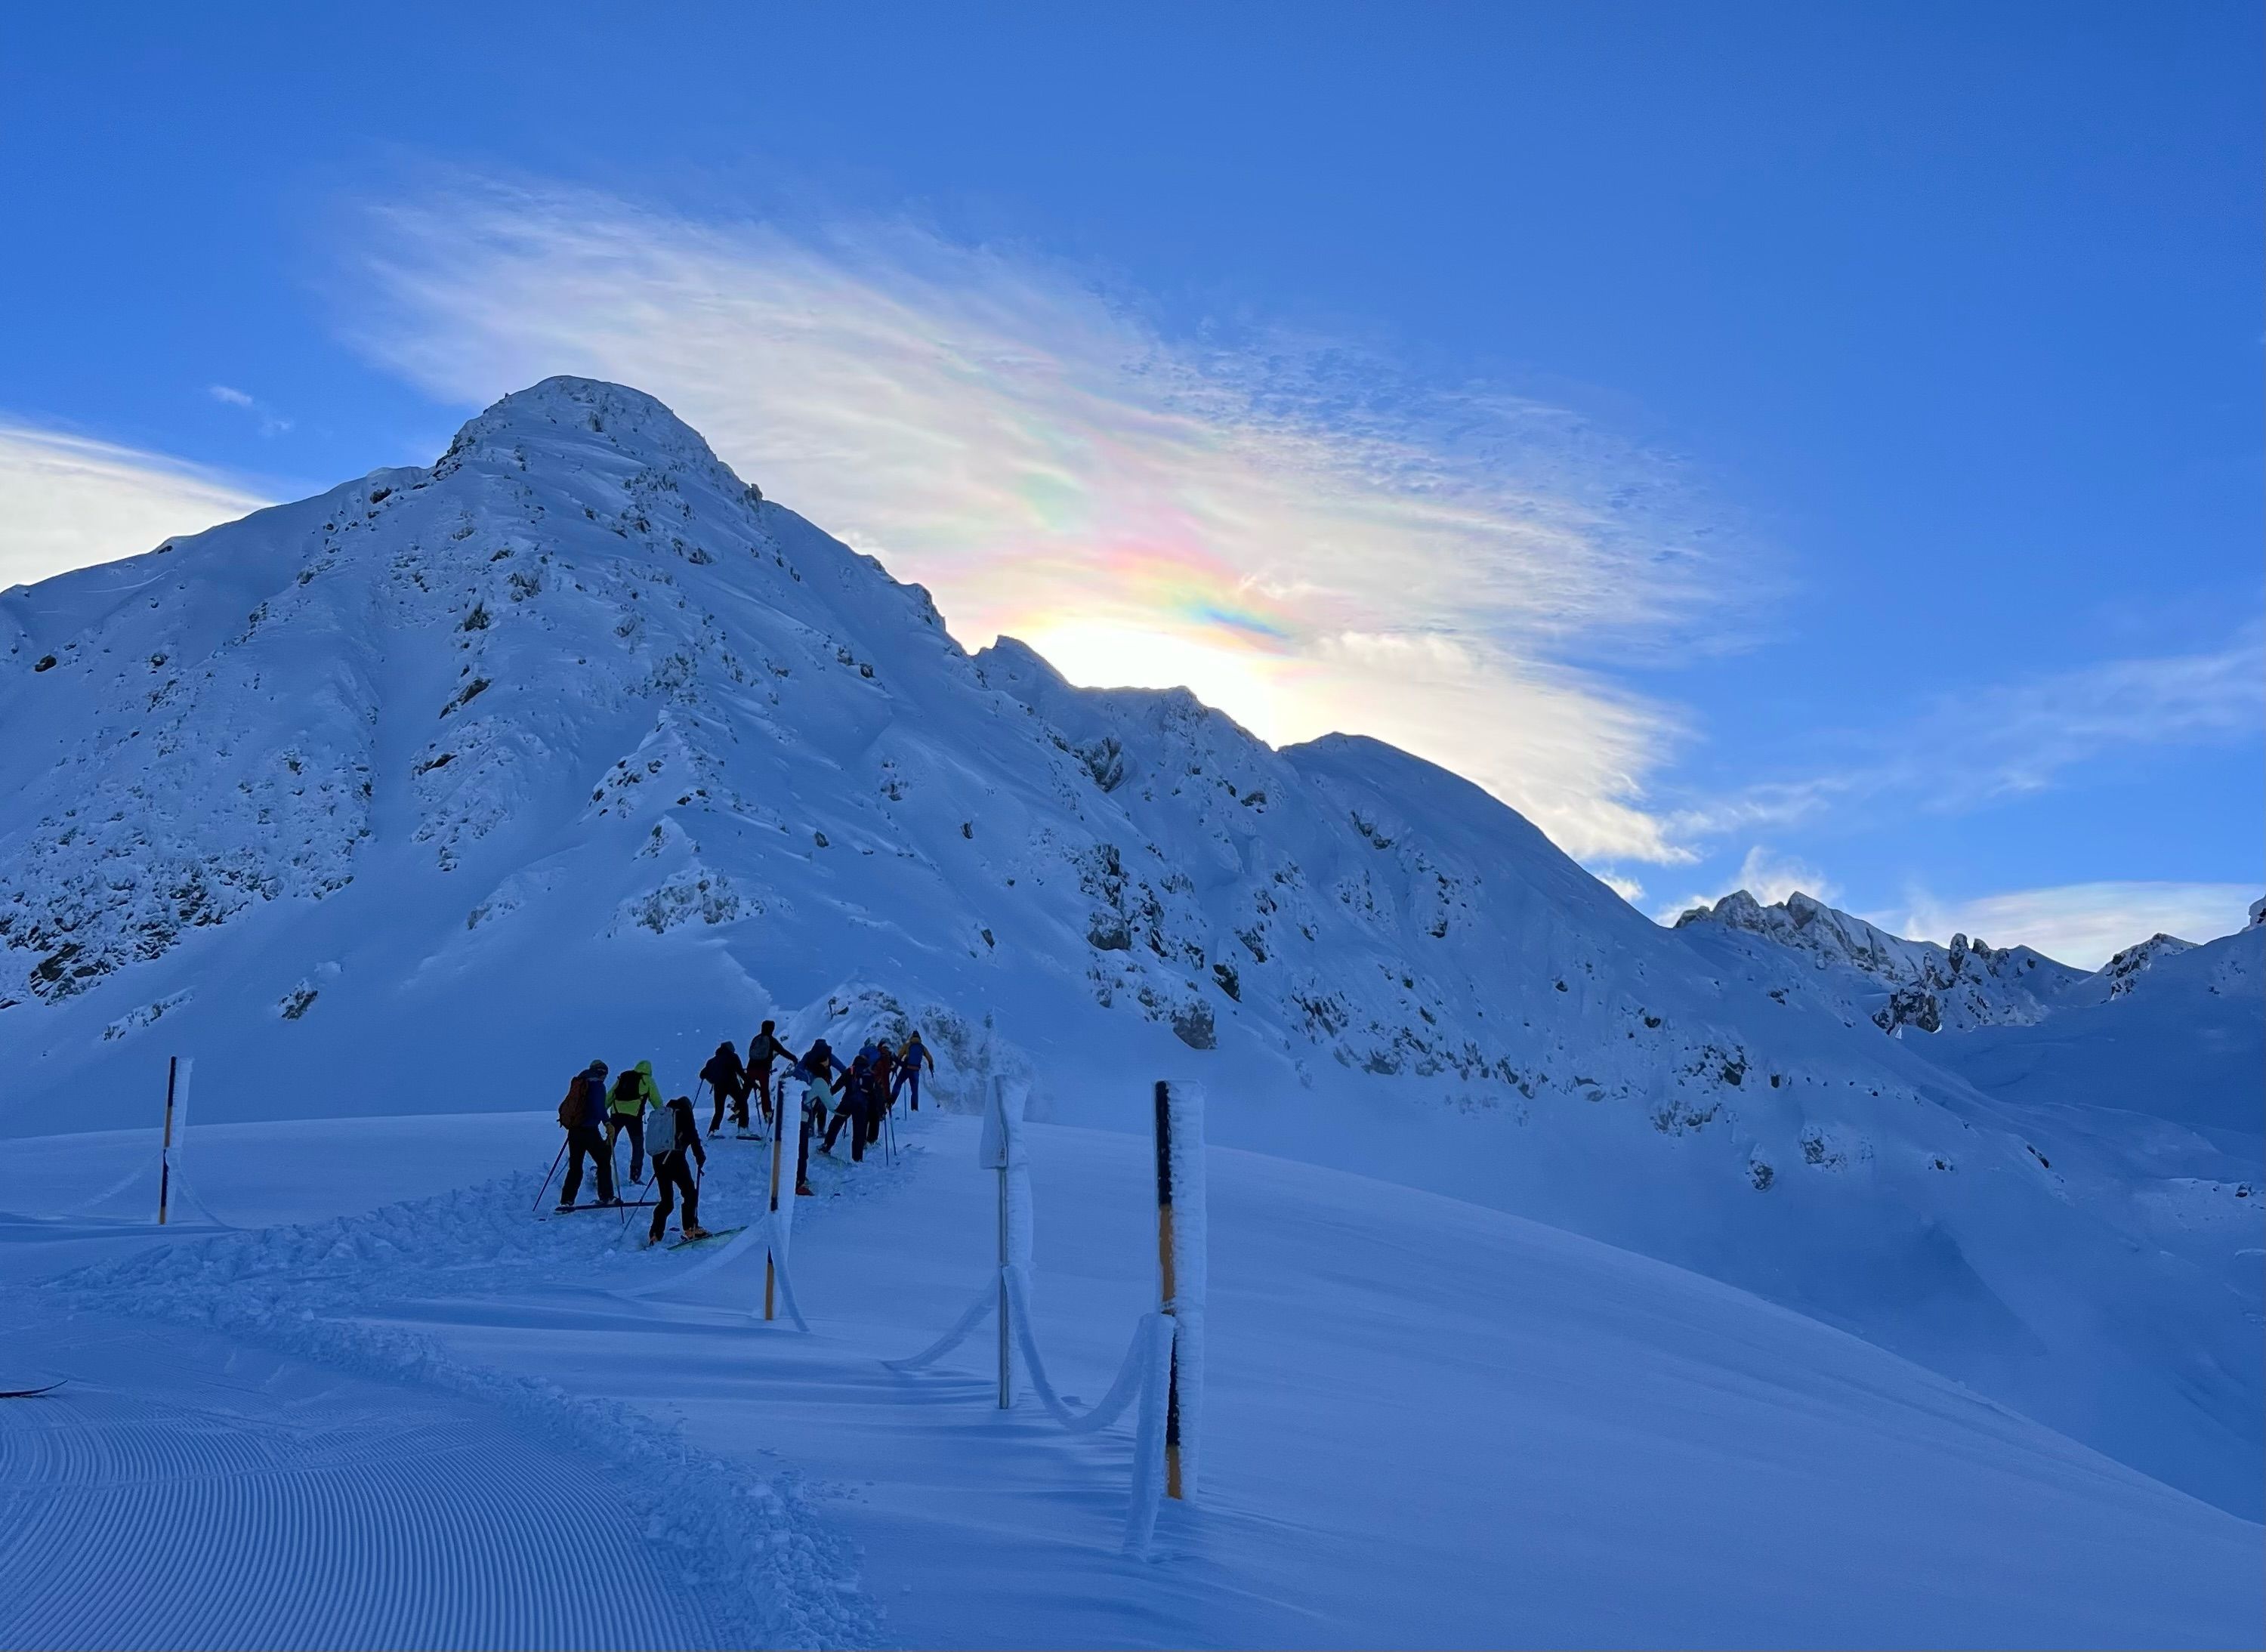 Skiing past a snow-covered mountain under a blue sky with high clouds